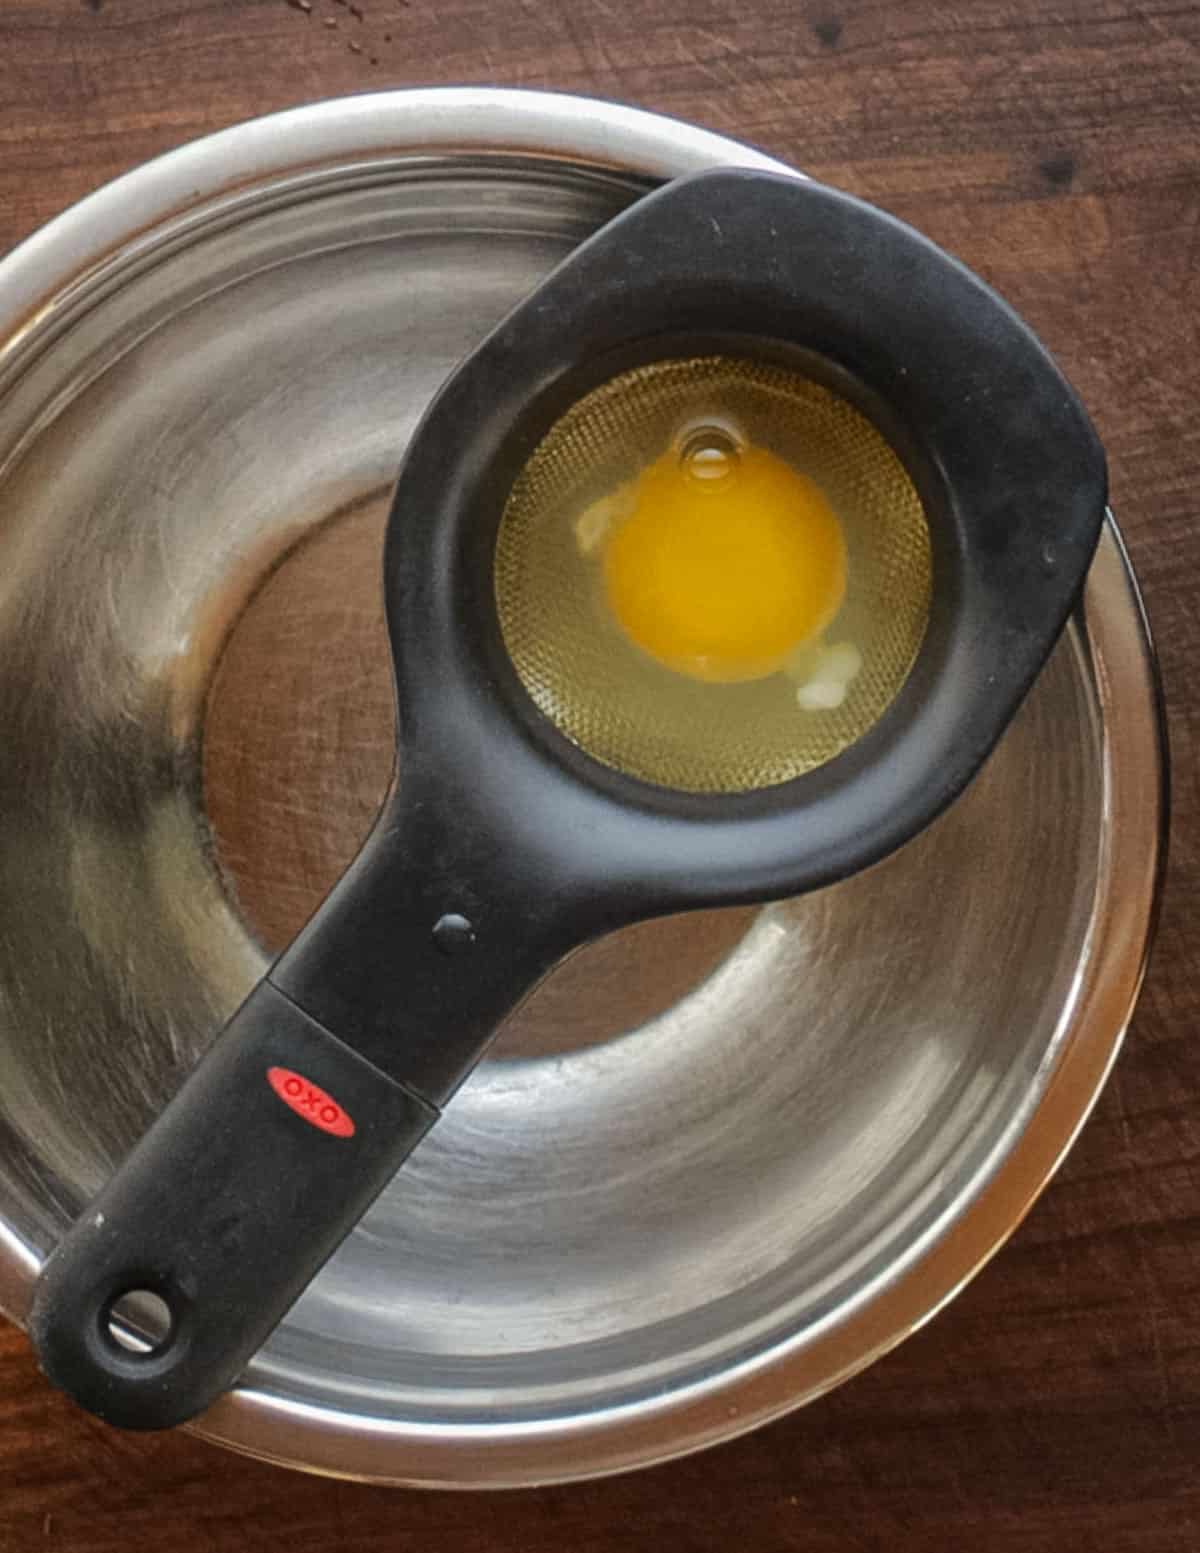 Draining an egg in a strainer before cooking.